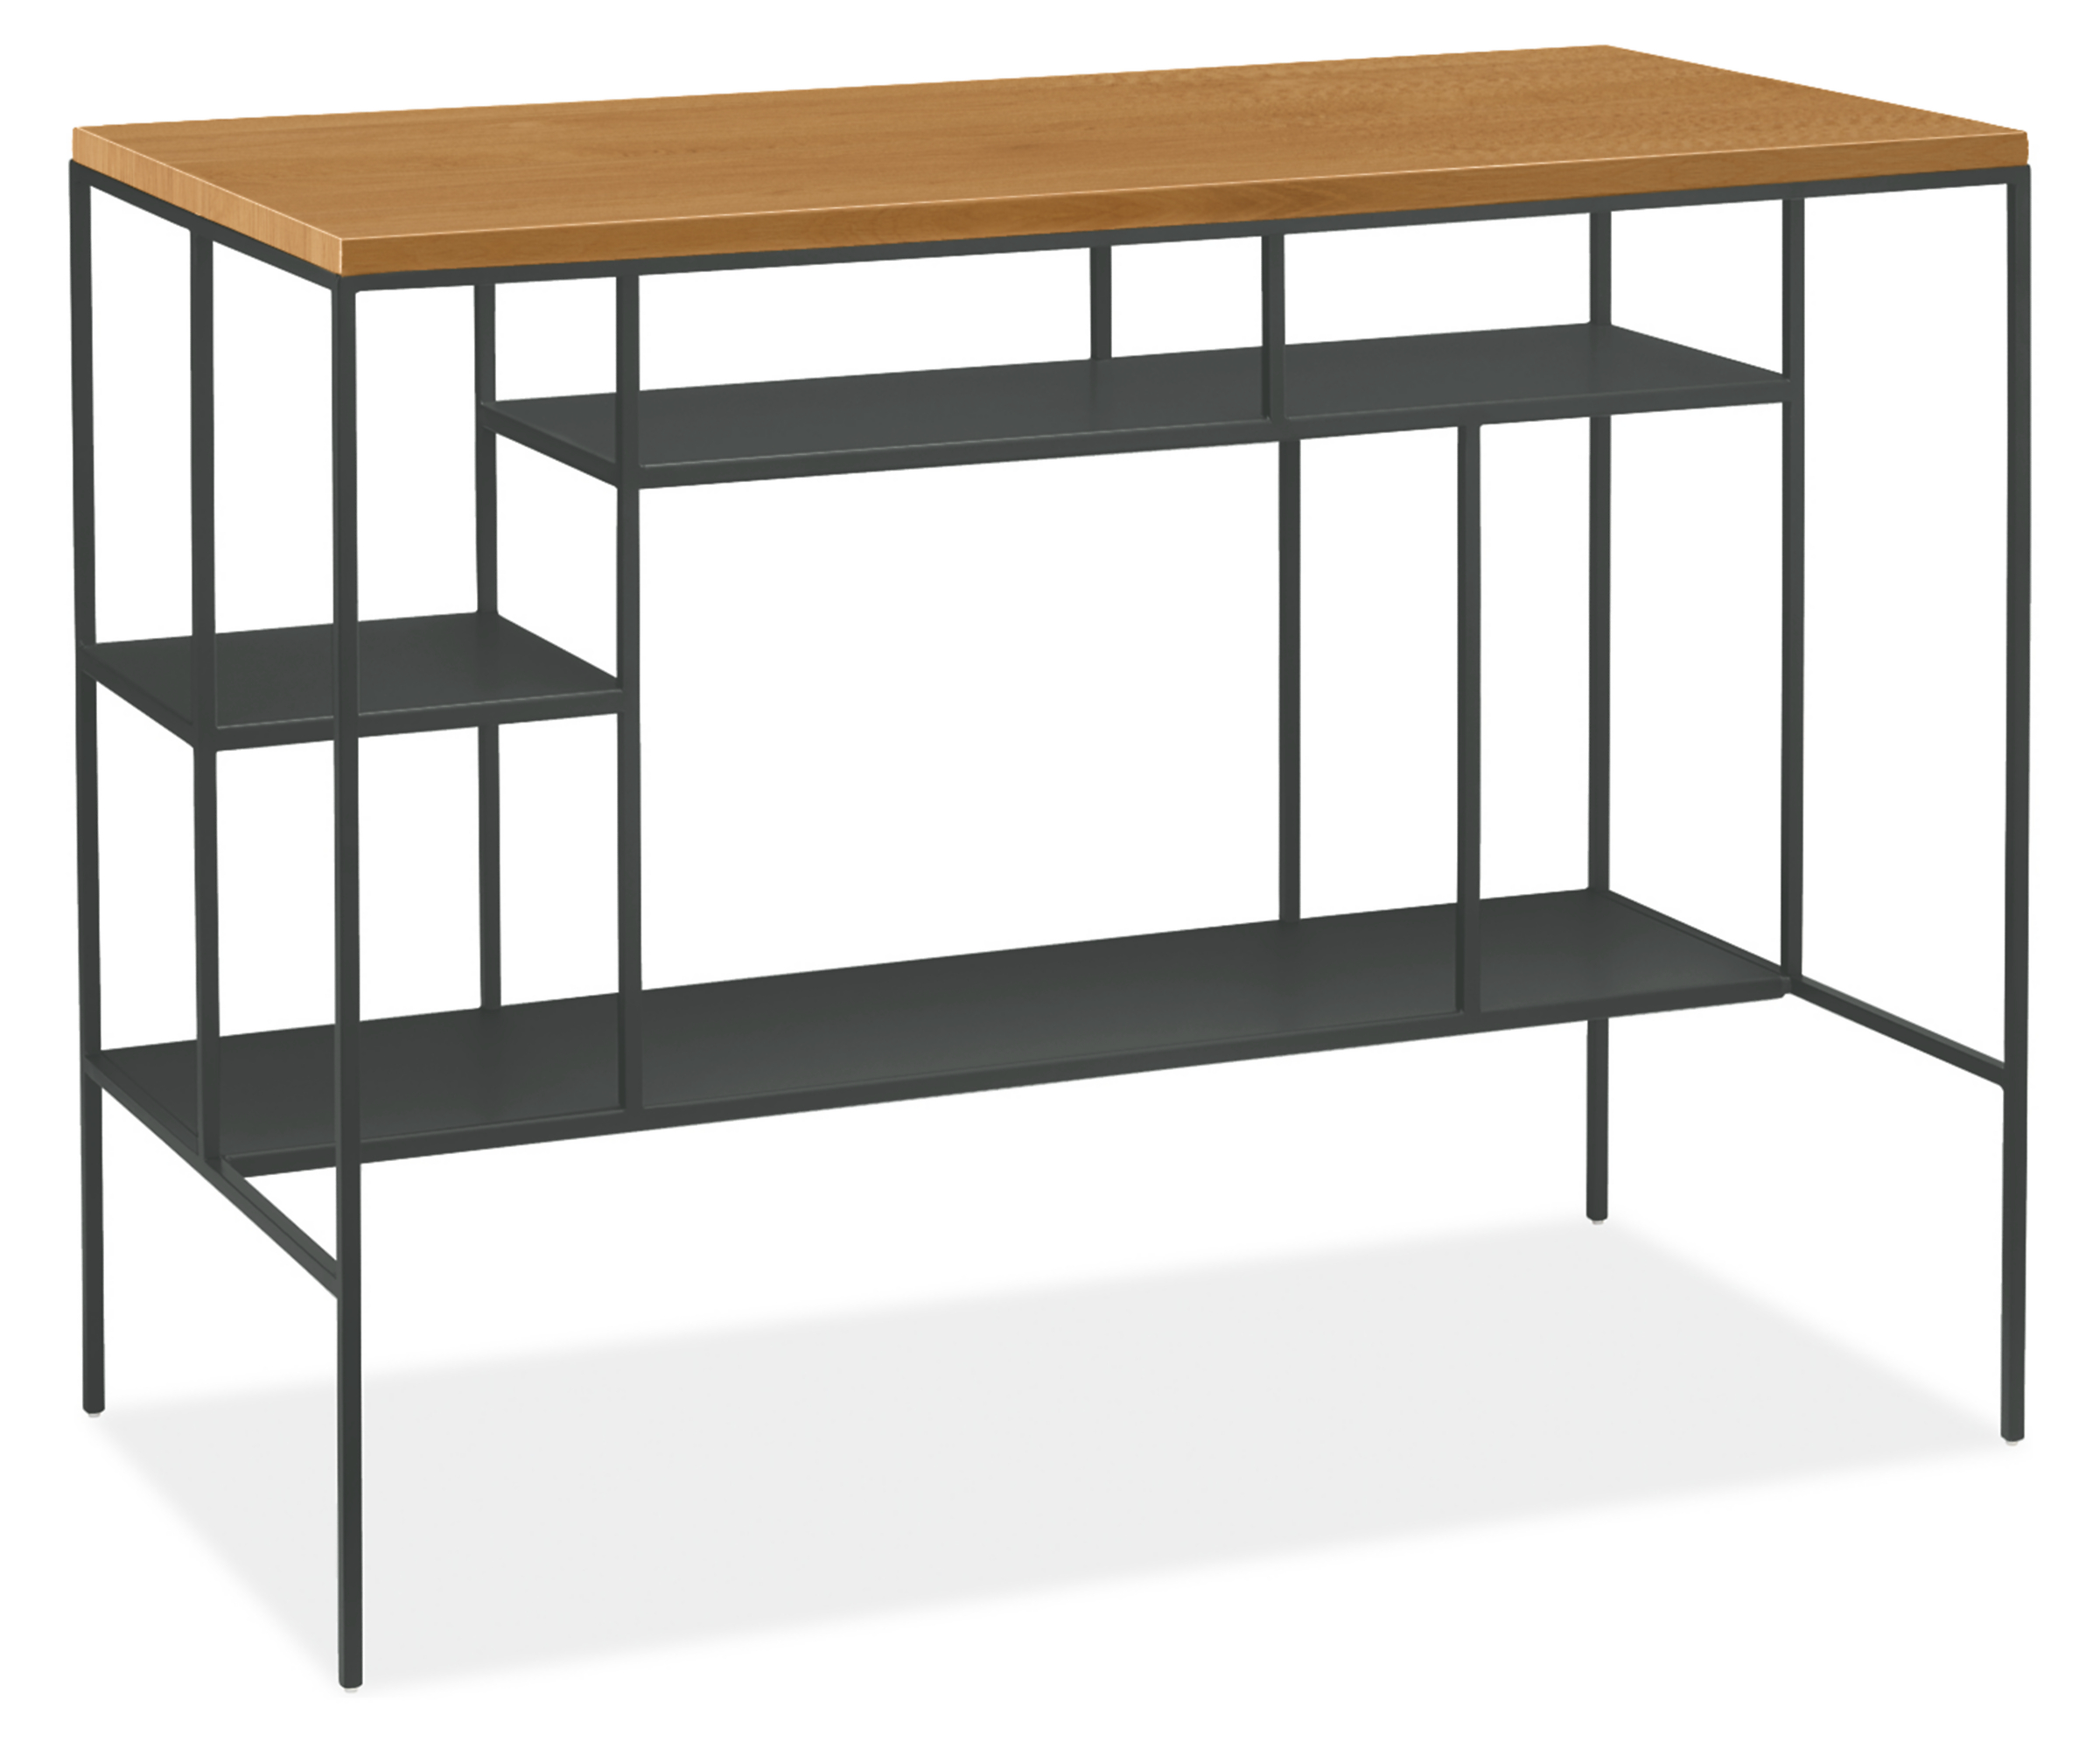 Bowen 48w 24d 36h Counter Table with Narrow Shelves